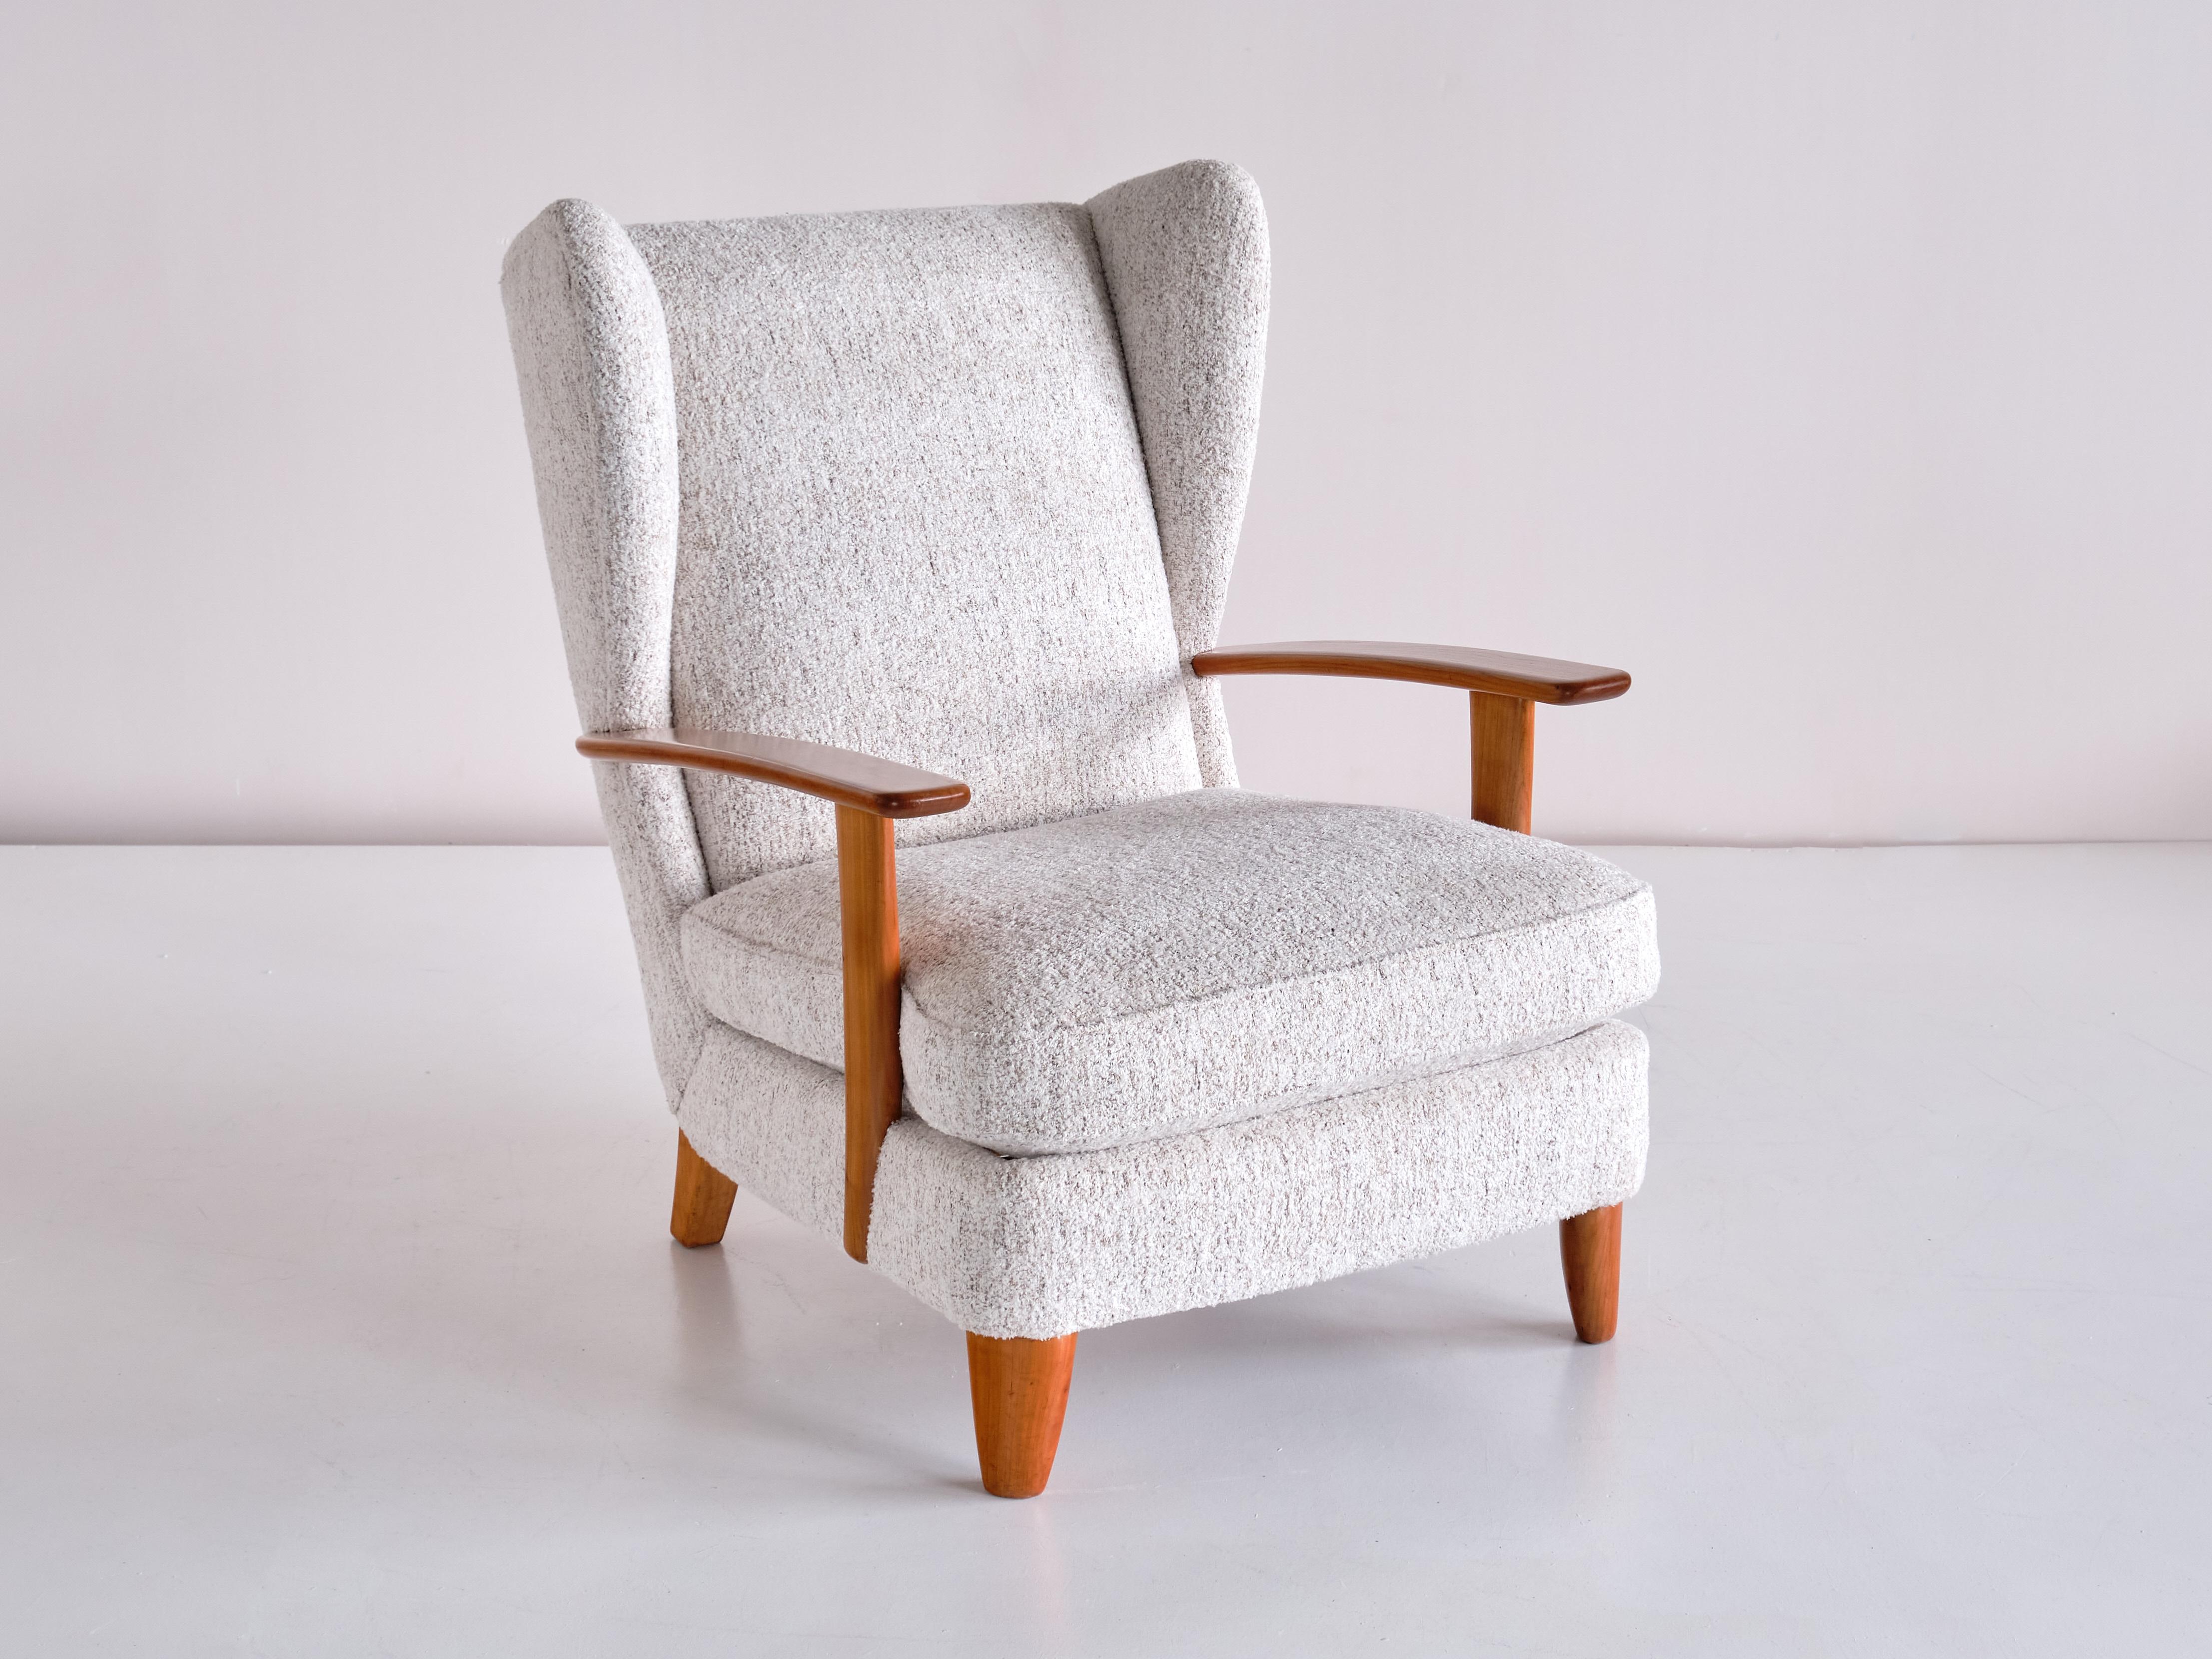 Modern Gio Ponti Wingback Chair in Cherry Wood and Mélange Nobilis Fabric, Italy, 1929 For Sale